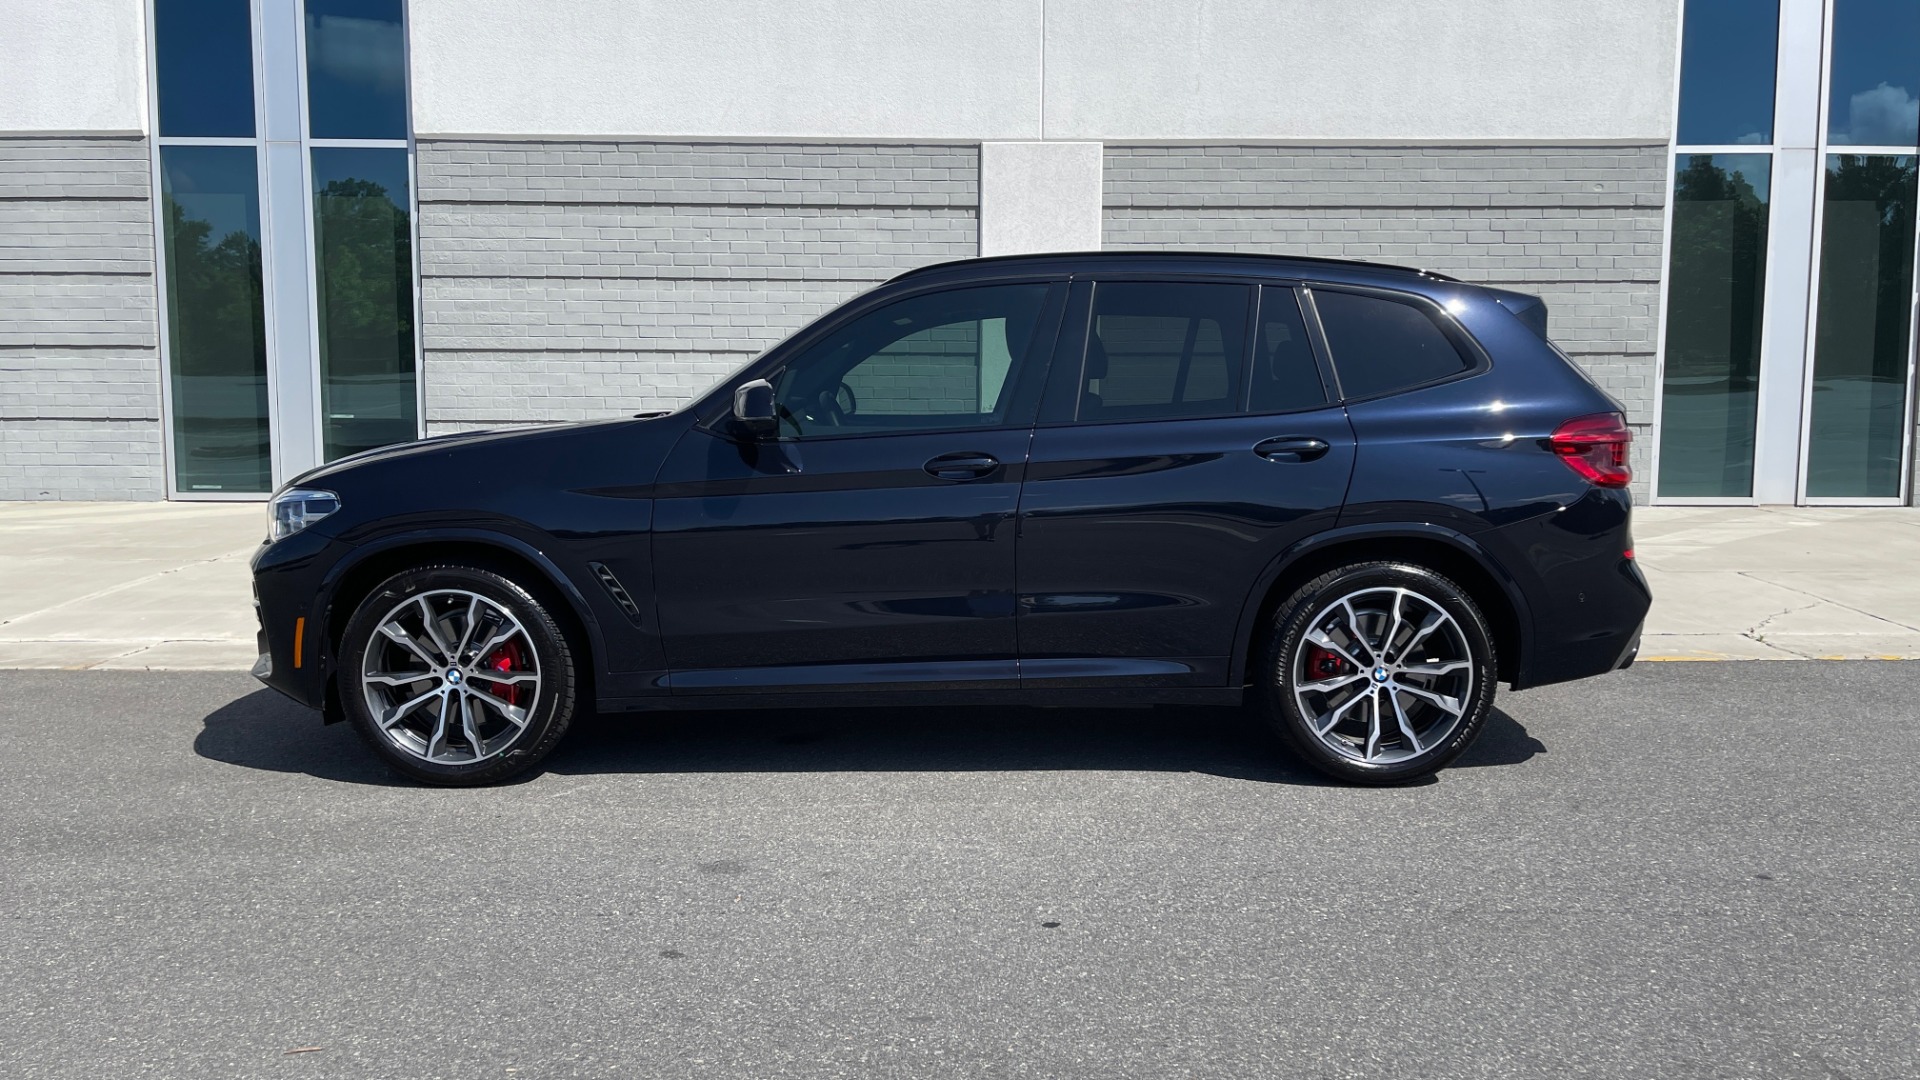 Used 2021 BMW X3 M40I M-SPORT / EXEC PKG / H/K SND / HUD / PARK ASST / HTD STS / REARVIEW for sale Sold at Formula Imports in Charlotte NC 28227 3